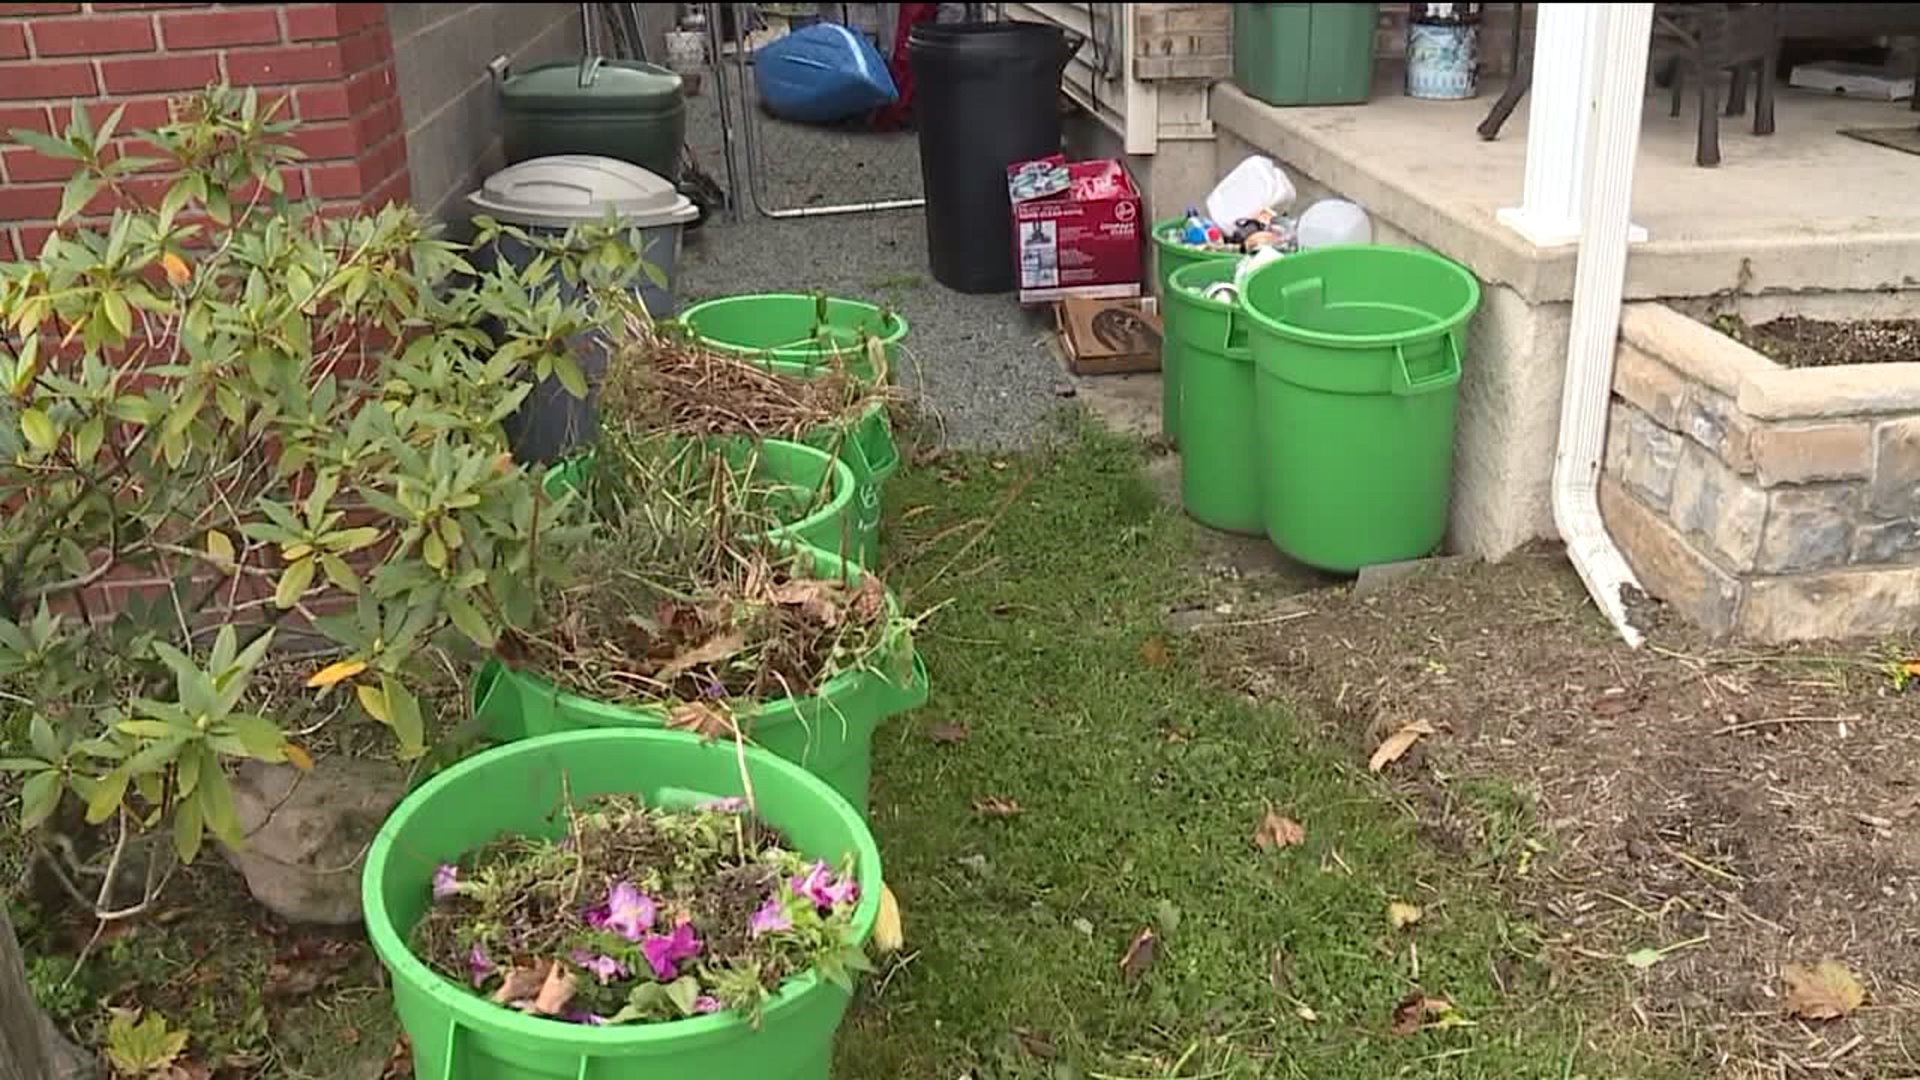 West Pittston To Go After Illegal Dumpers